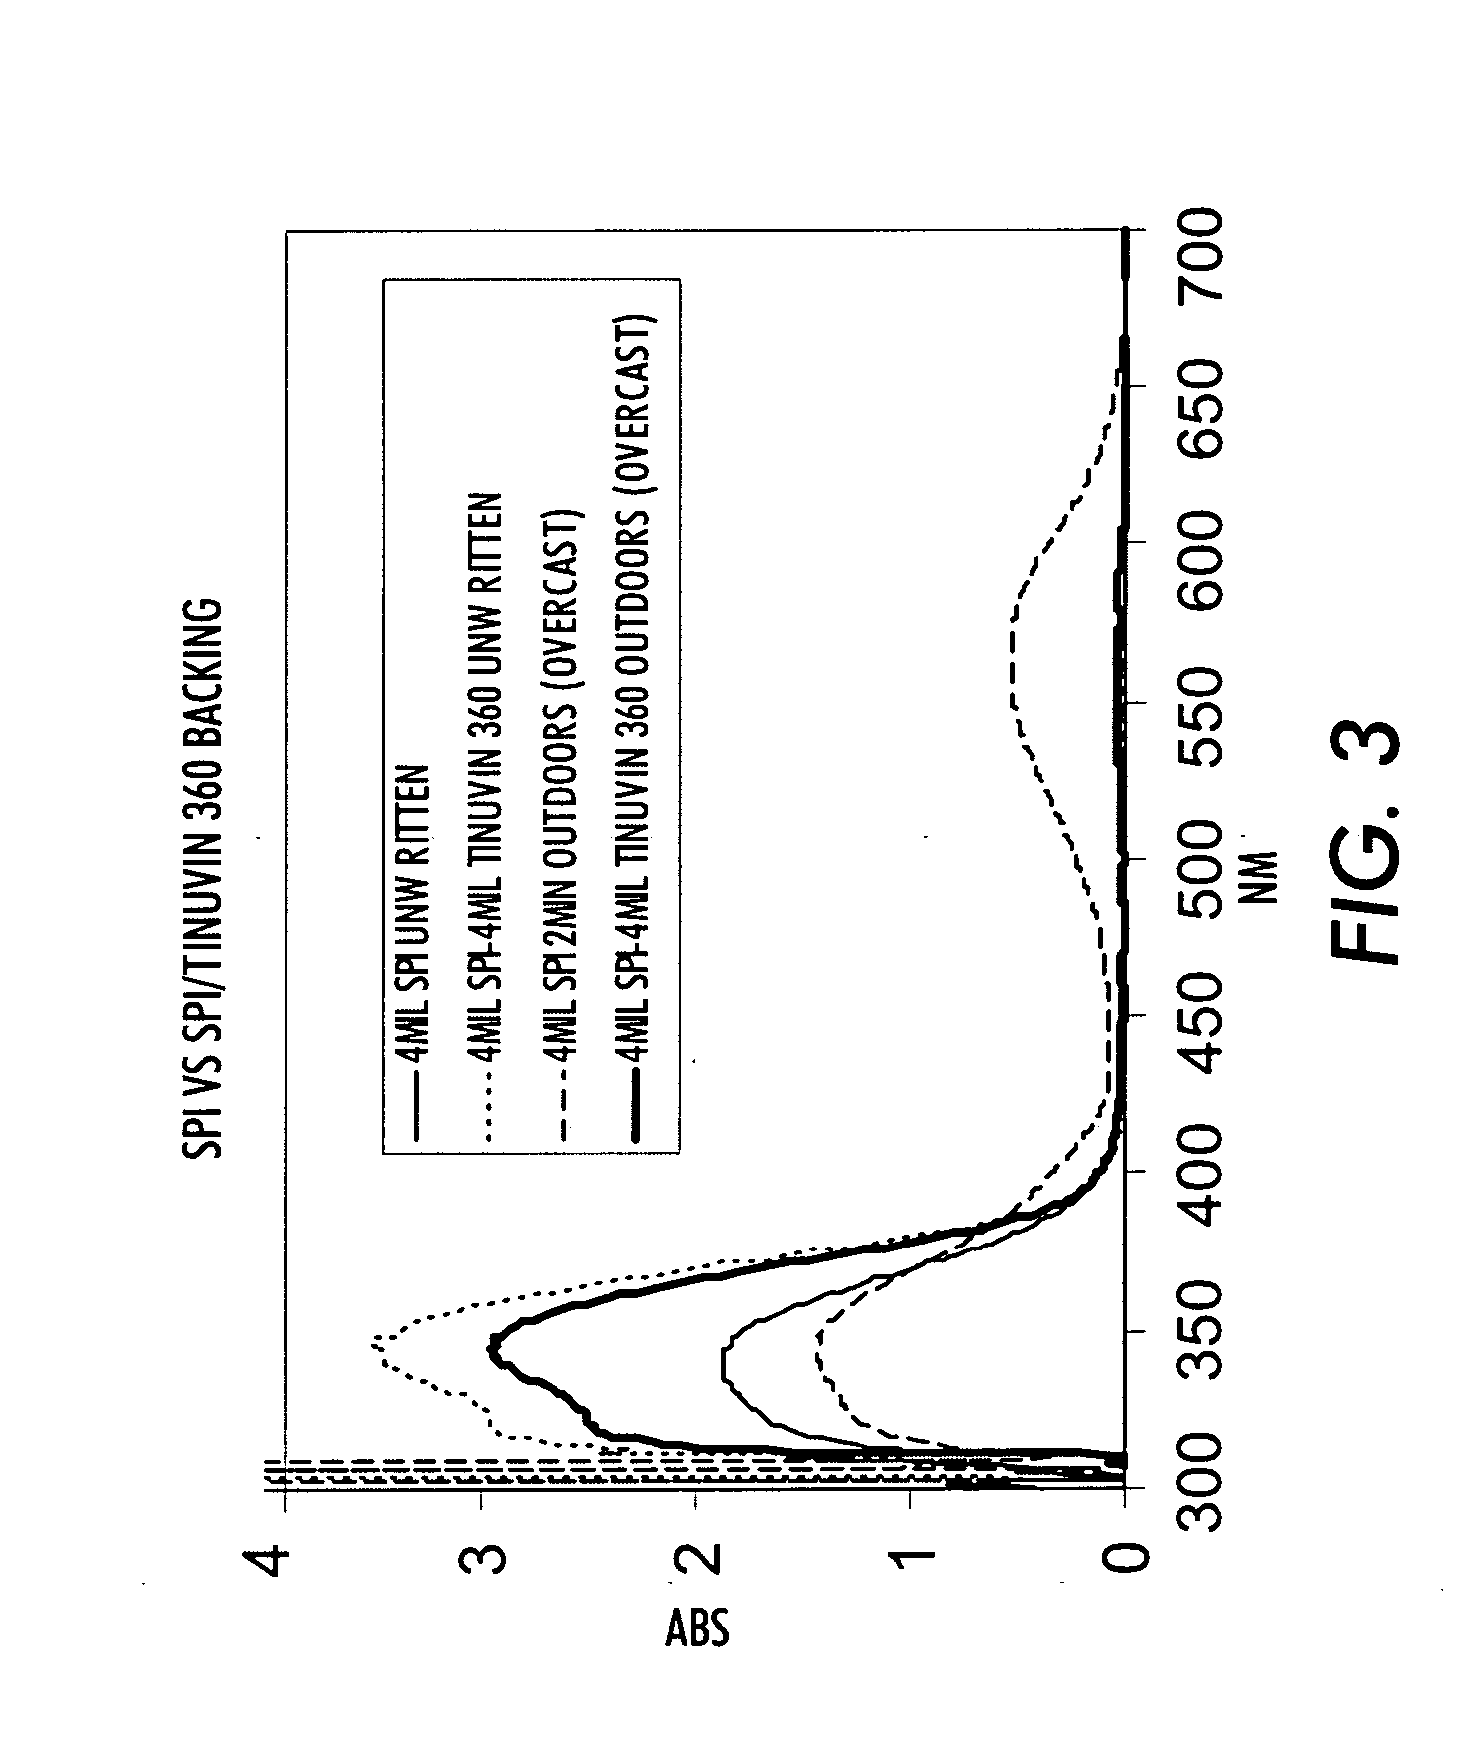 Dual-layer protected transient document